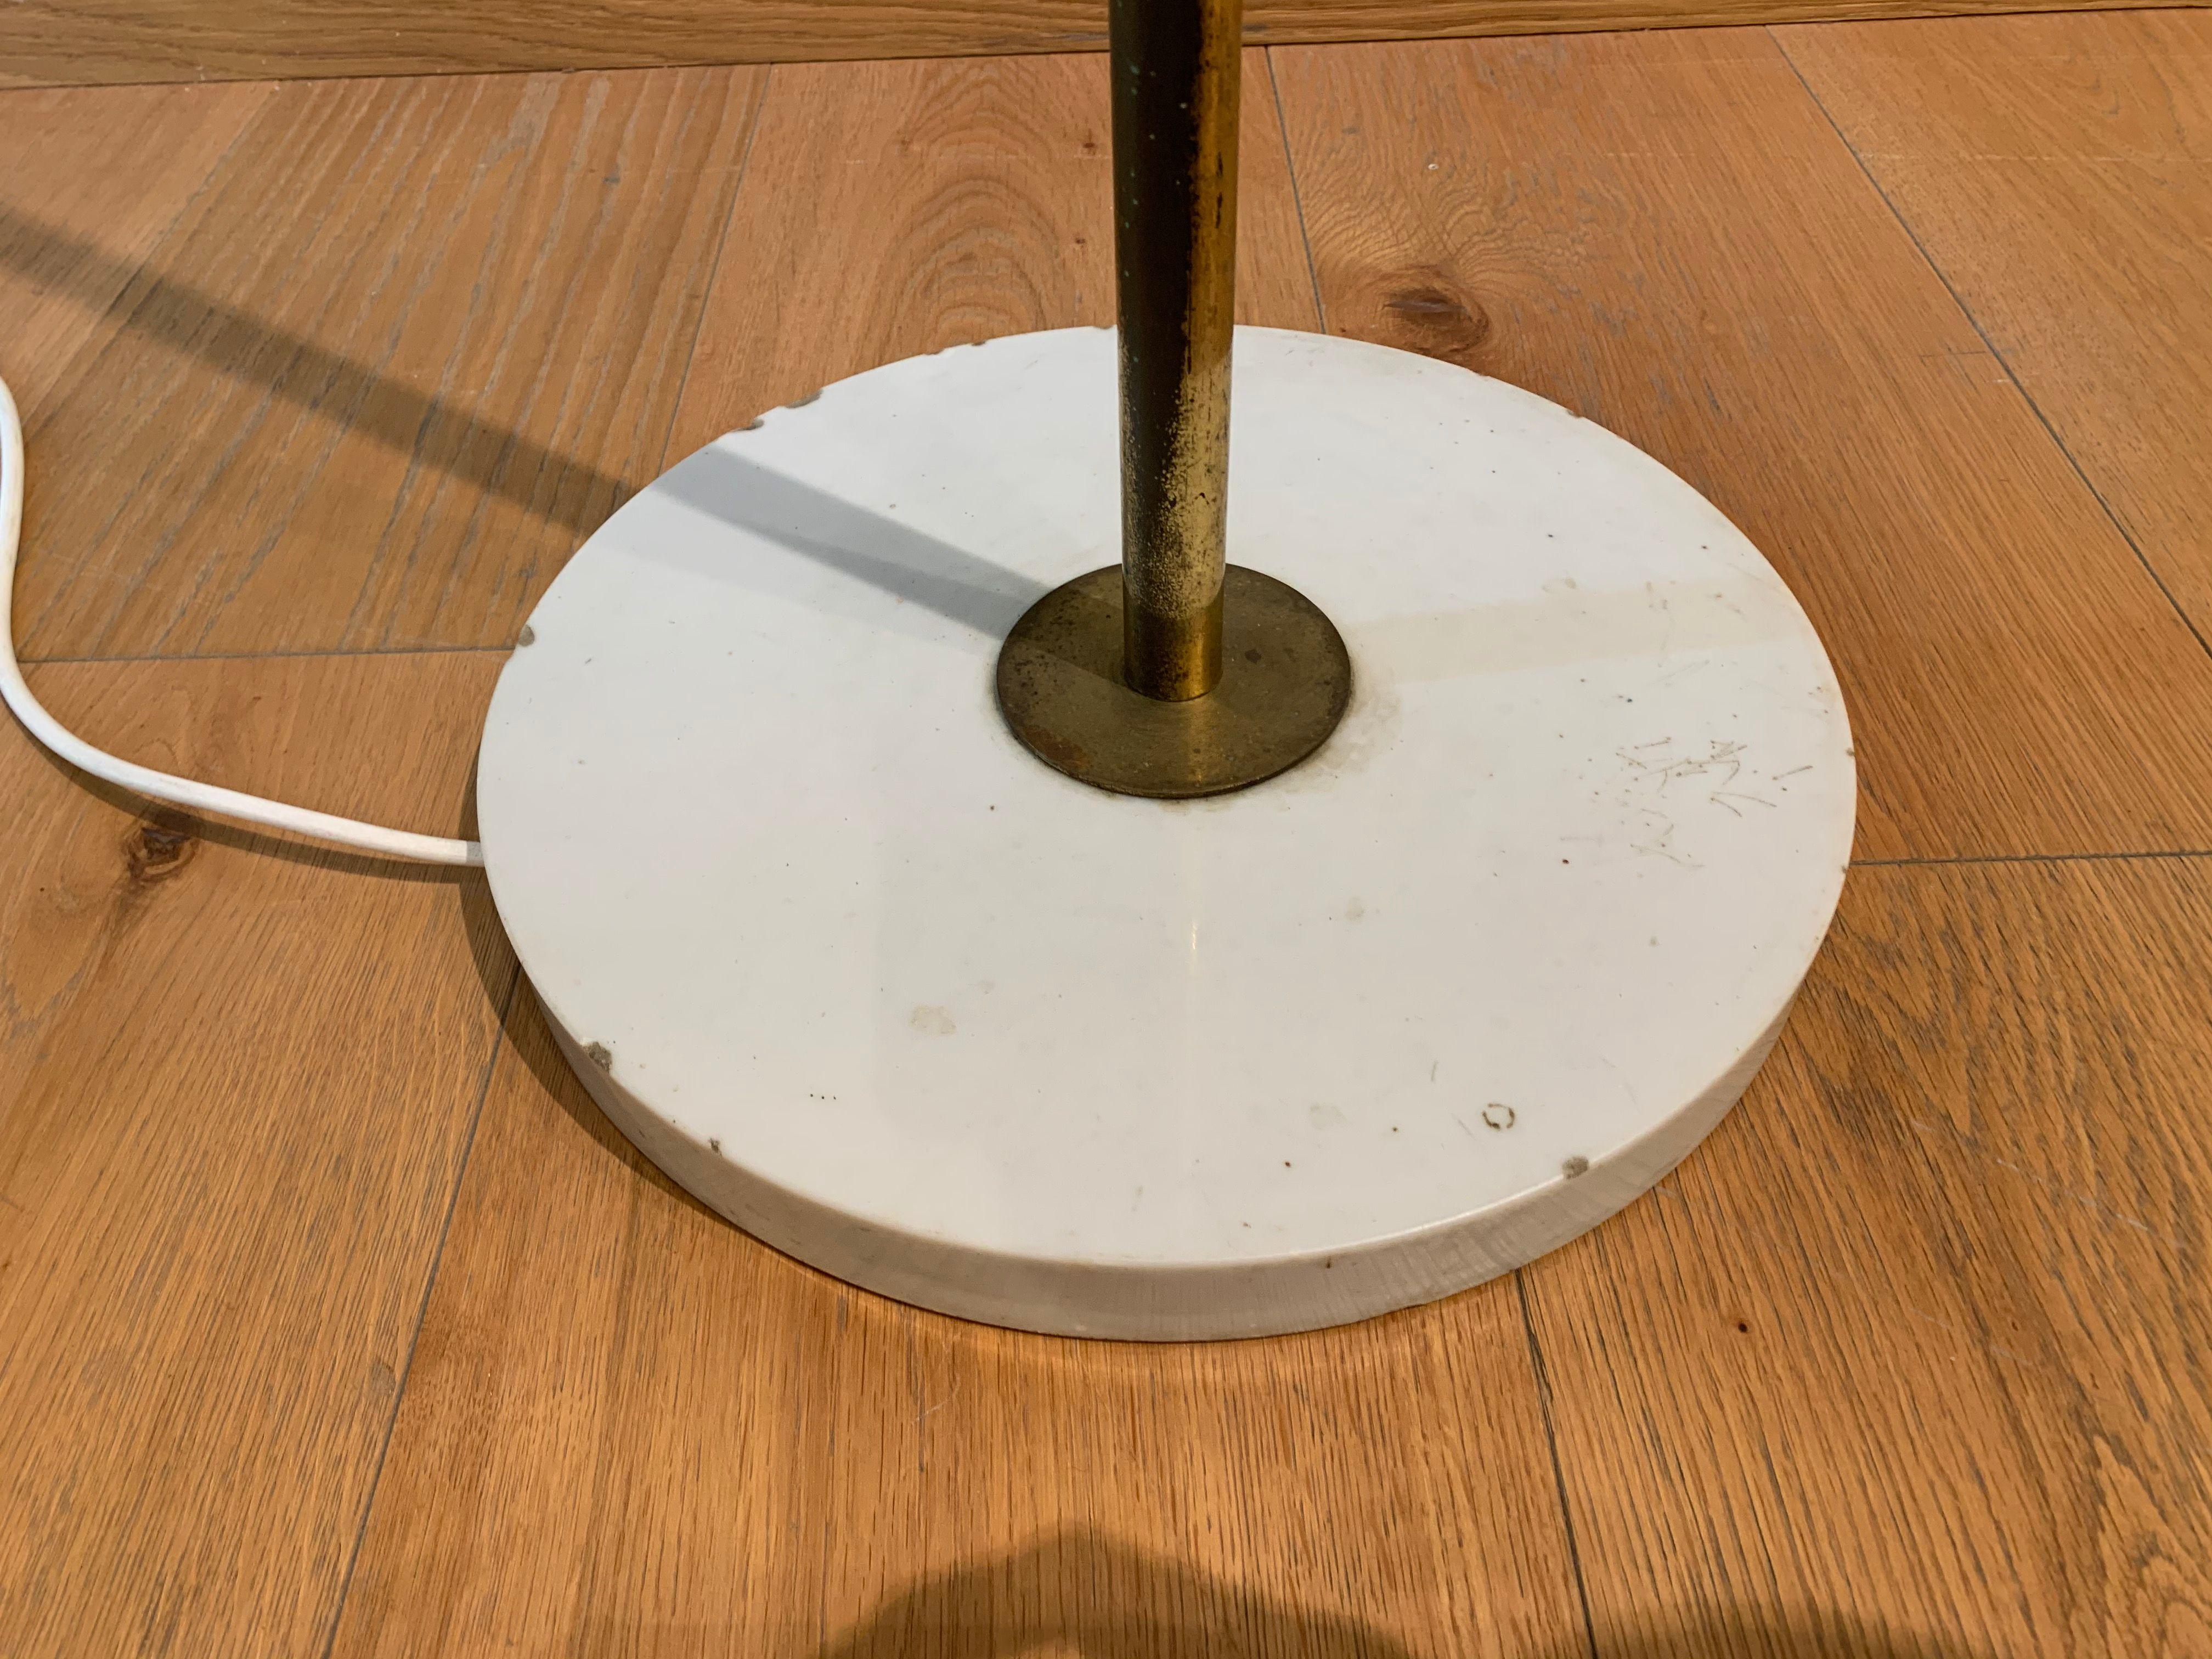 Brass Gino Sarfatti Floor Lamp Model 1044, Made in Italy, 1952, Arteluce Production For Sale